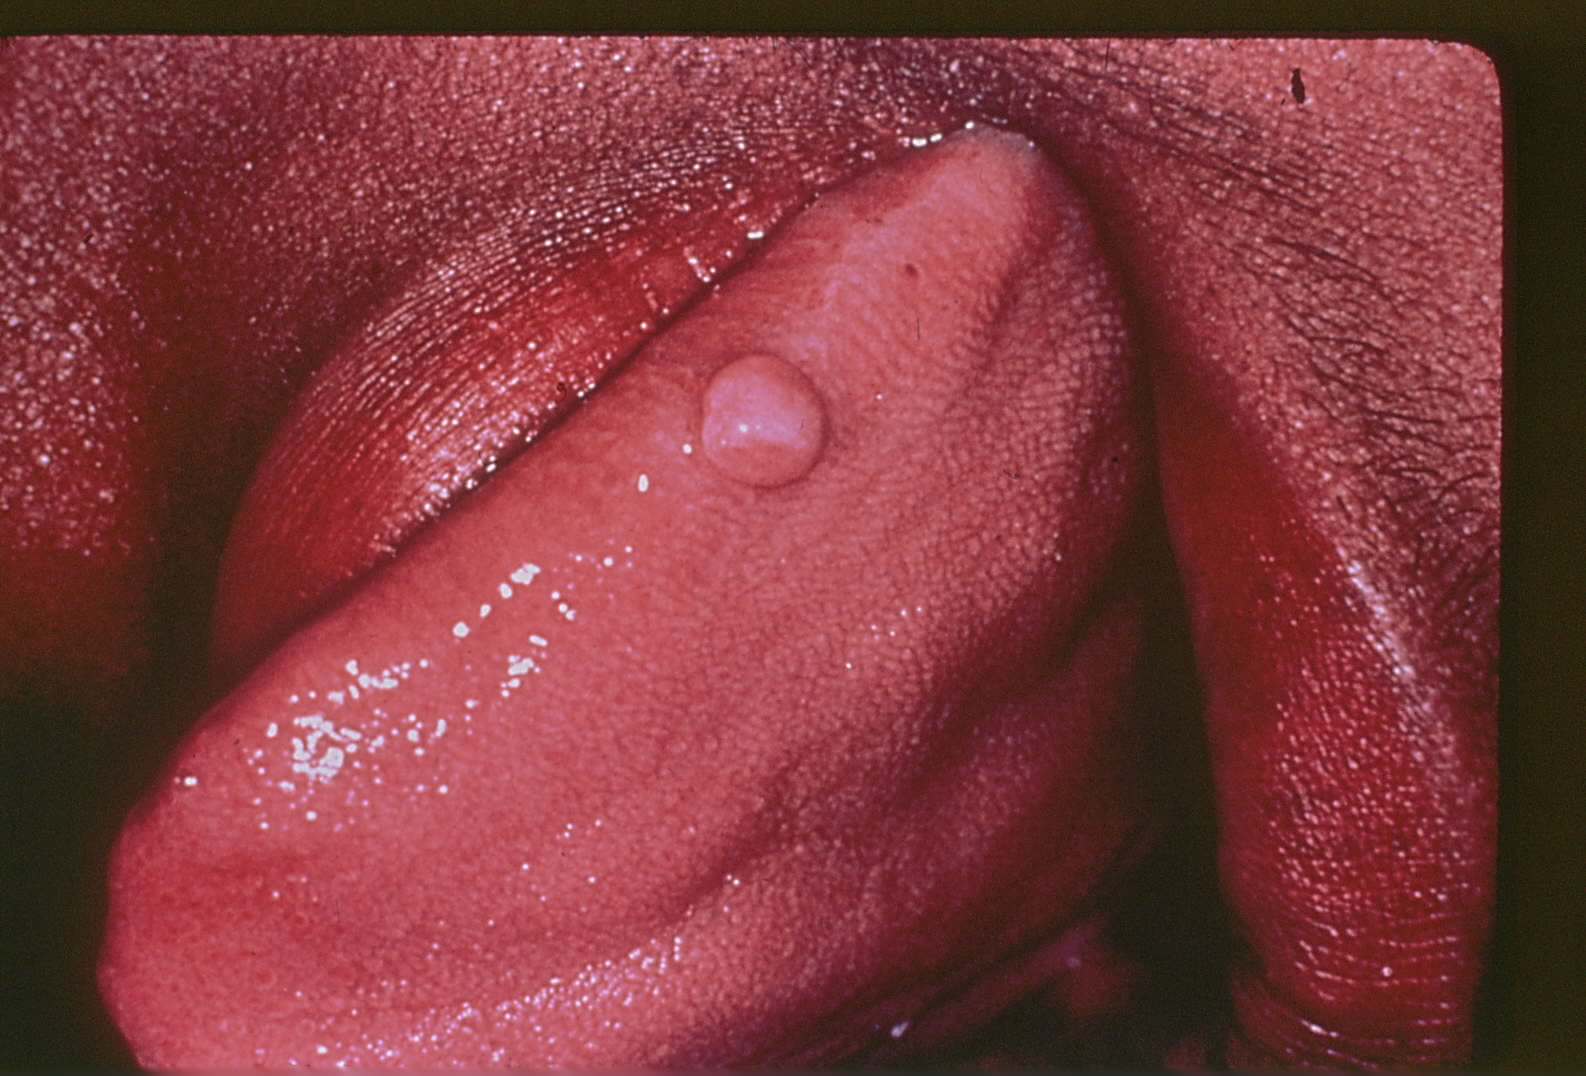 Traumatic fibroma noted on the tongue